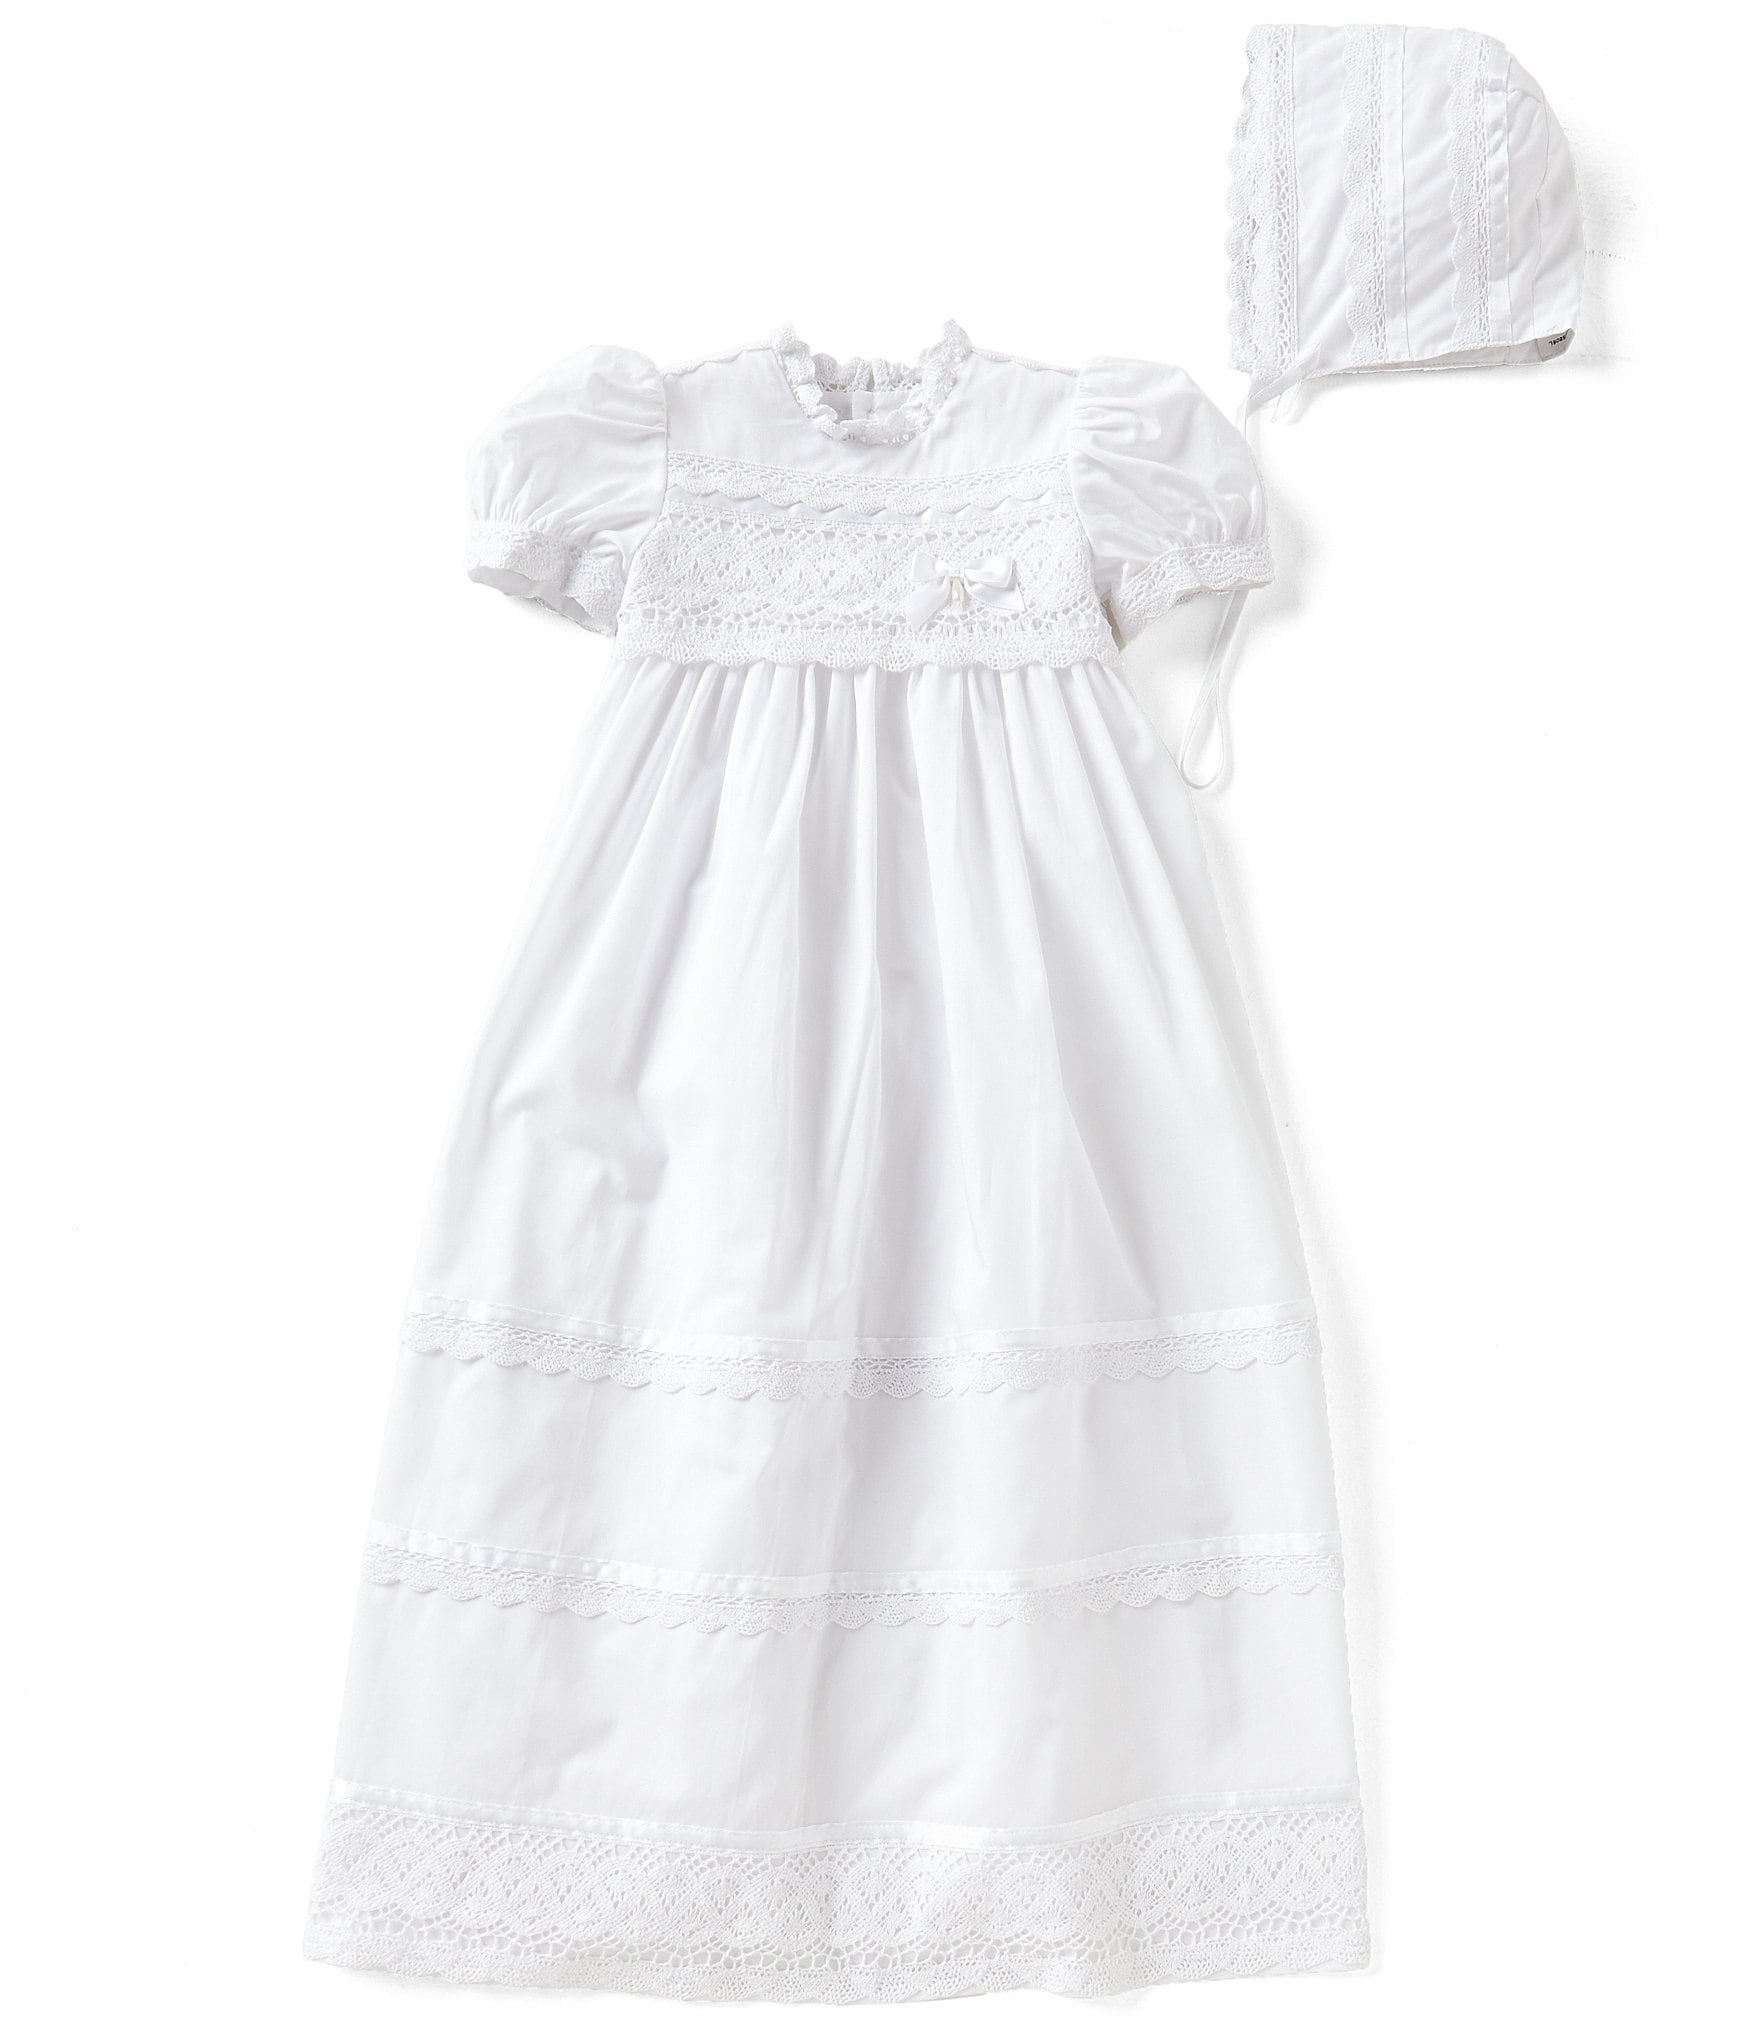 Dressy Daisy Baby Boy Satin Baptism Clothes Christening Outfit with Bonnet 5 Pieces Set Formal White Suit for Infant